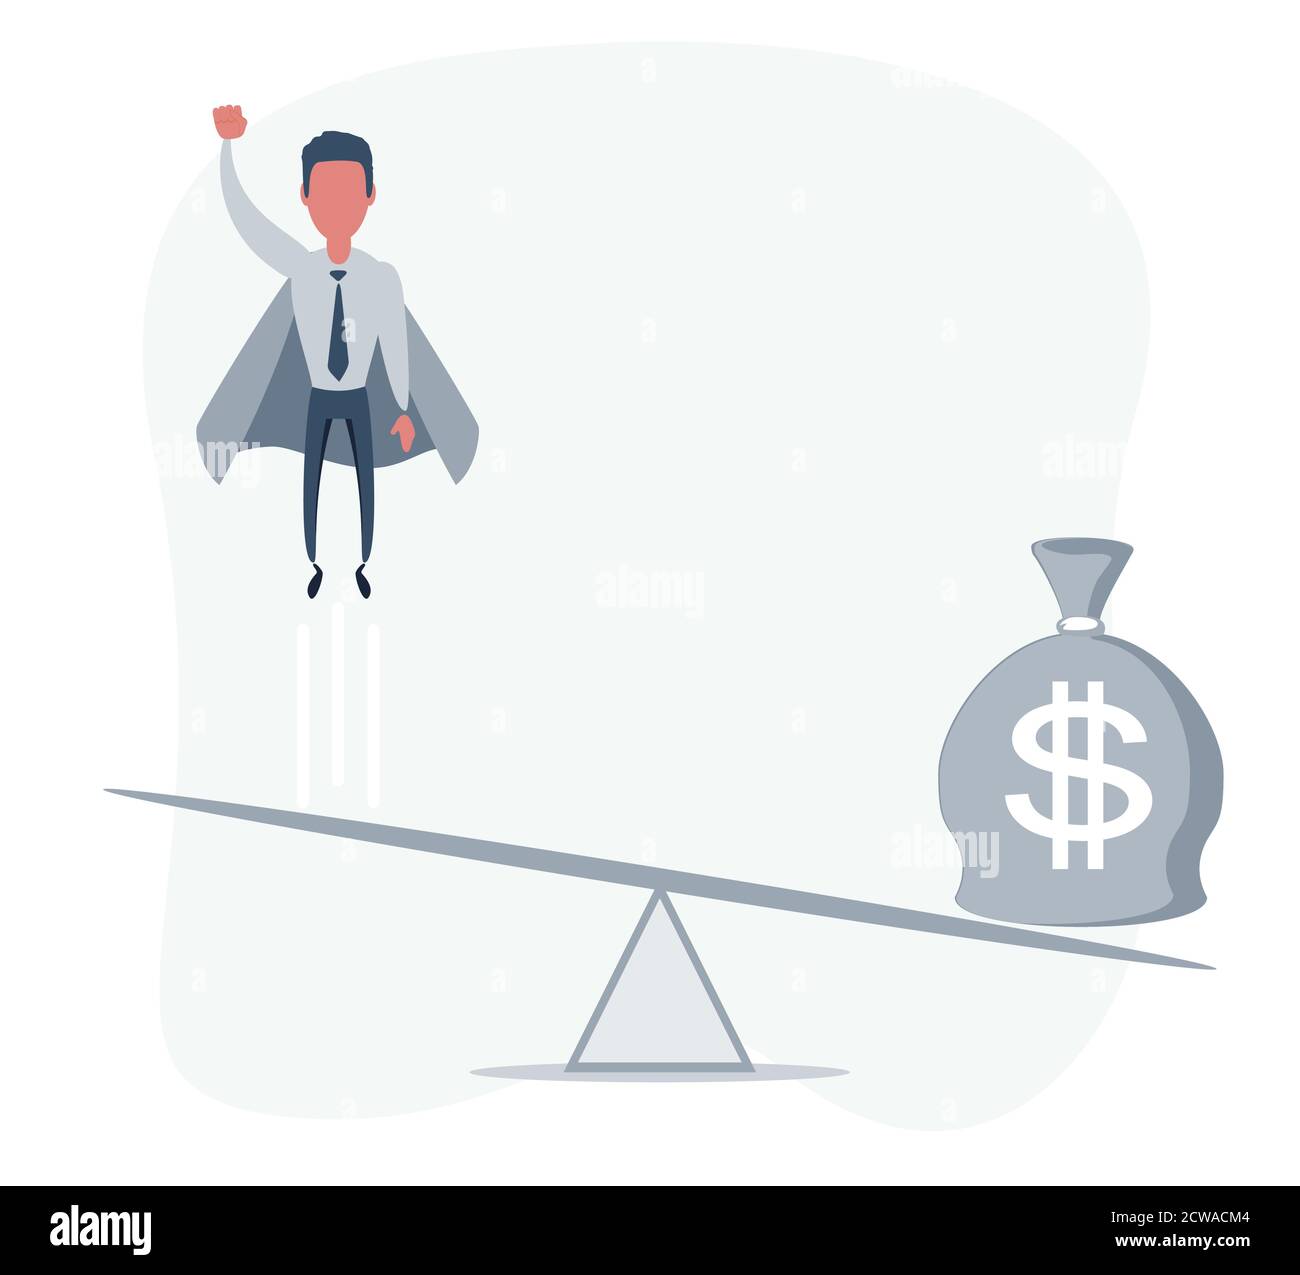 Business startup concept. Illustration with a businessman flying up and a bag full of money. Stock Vector